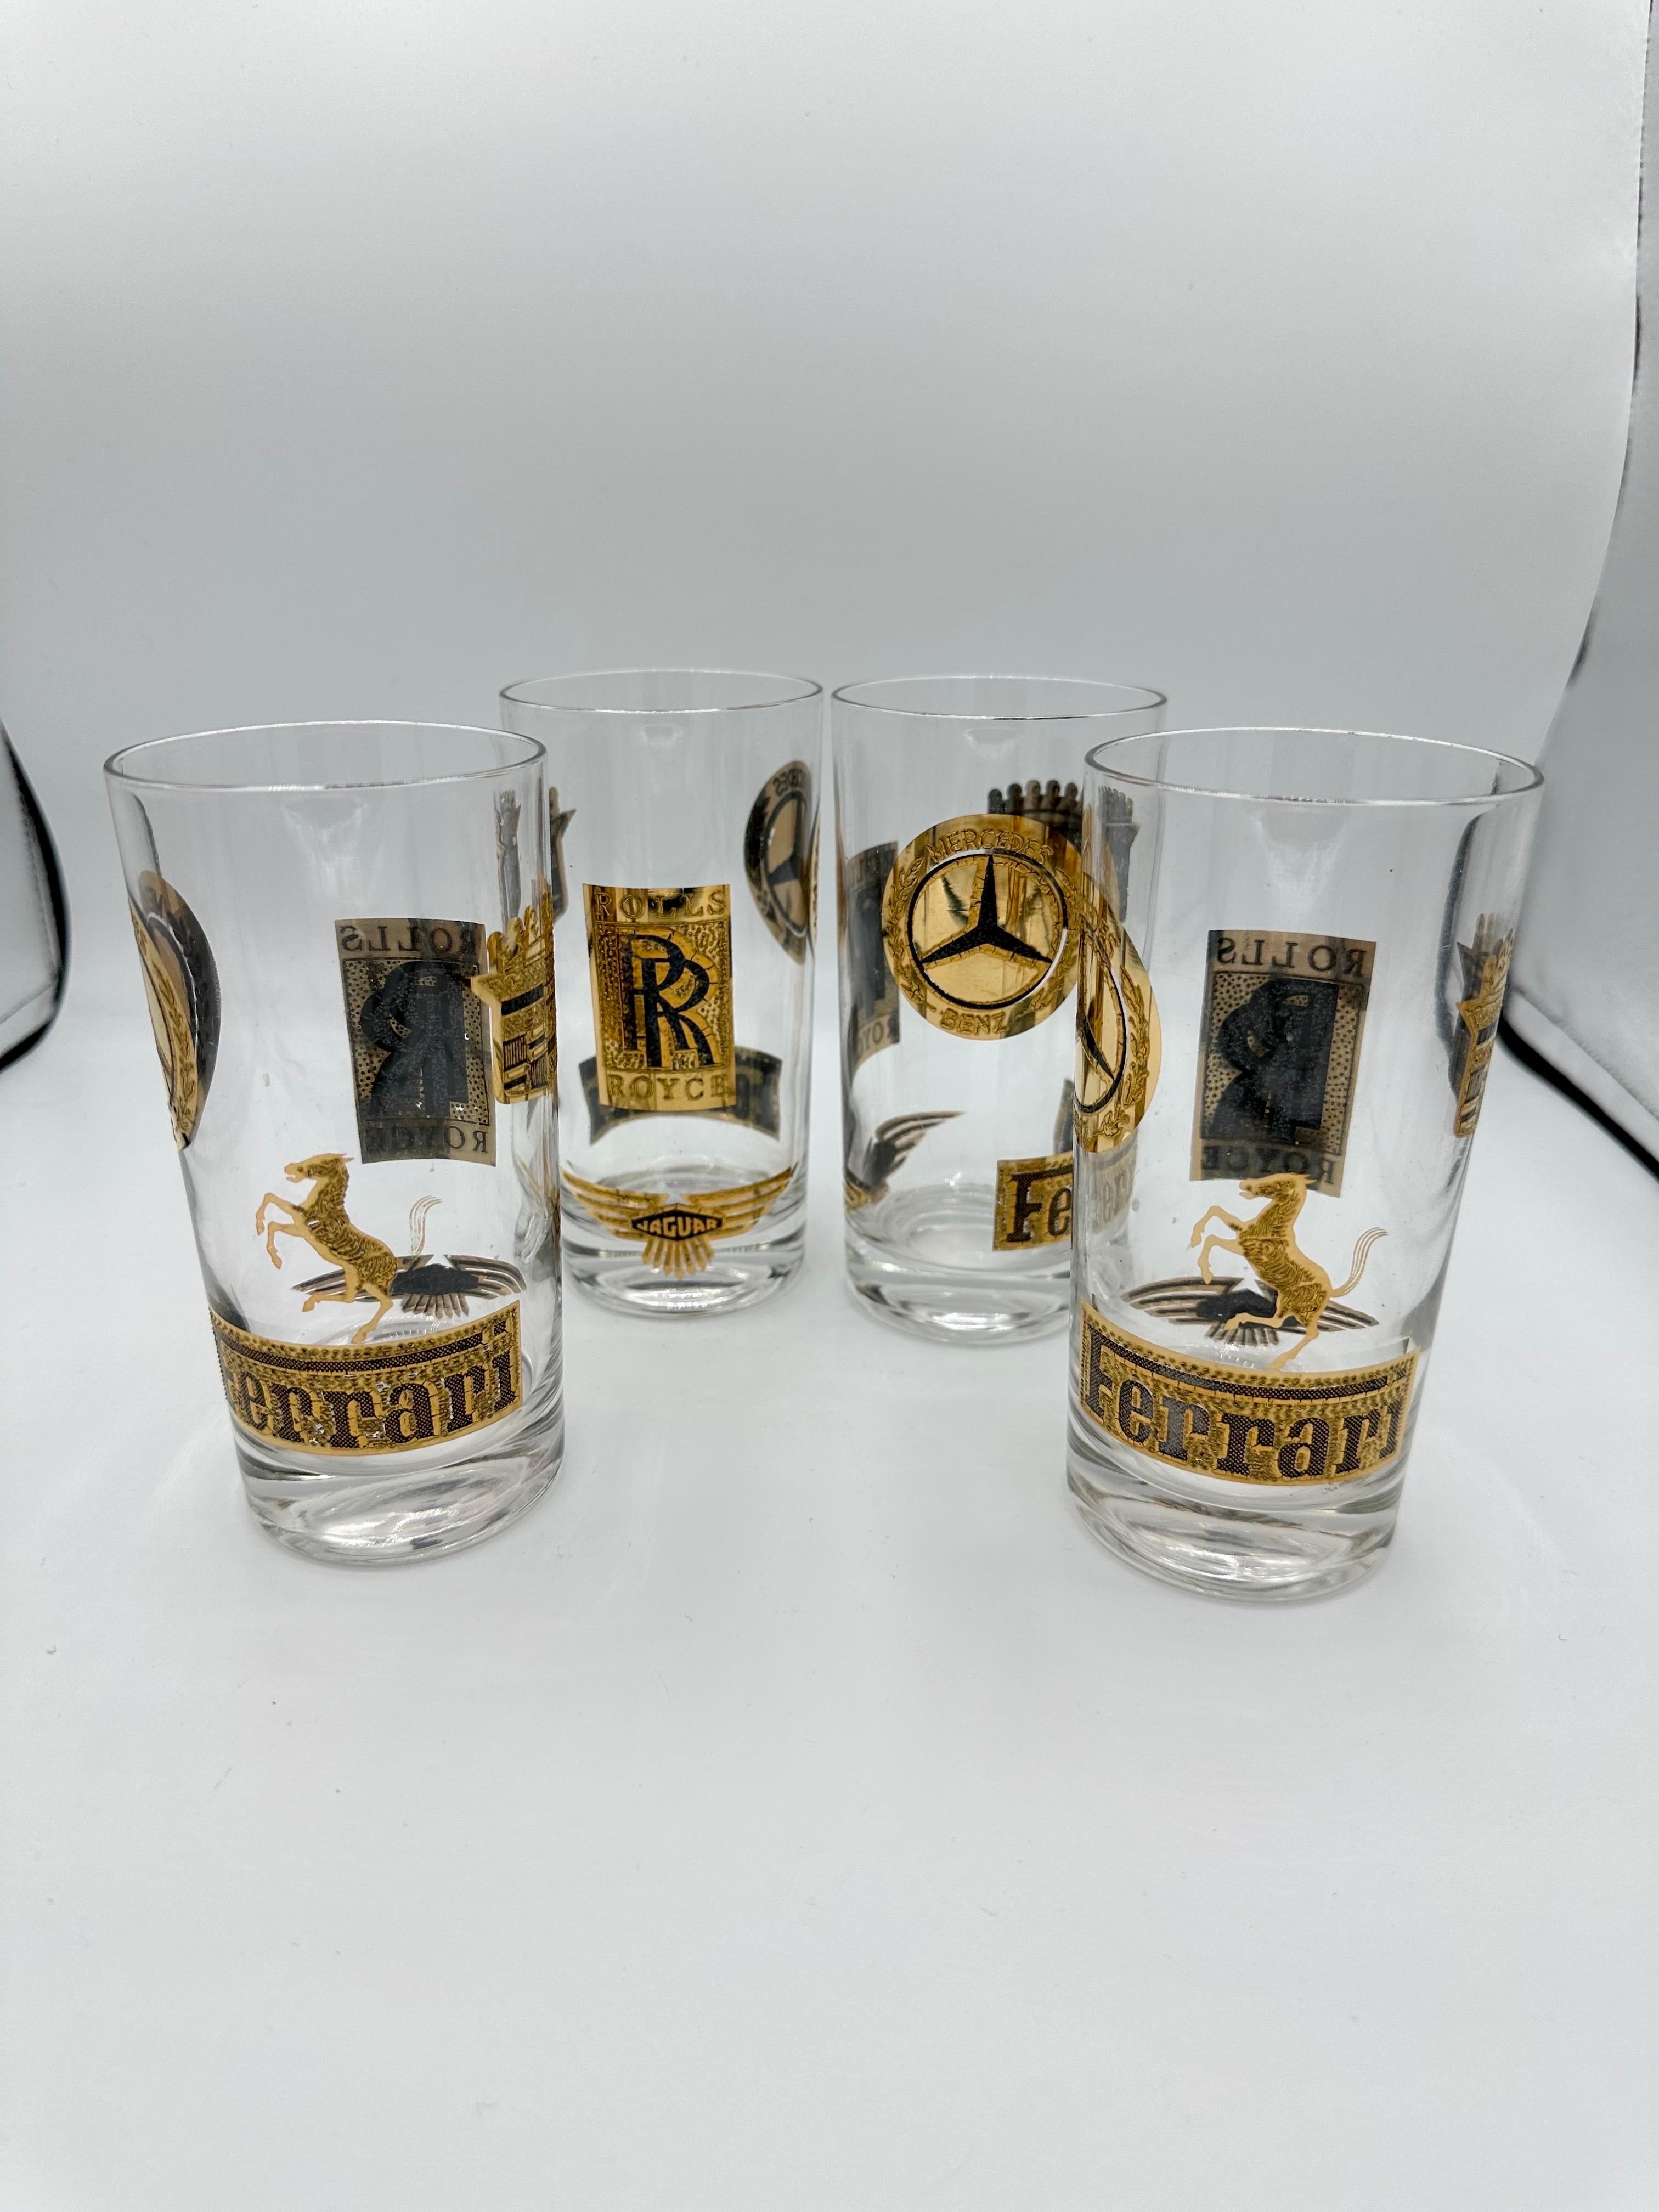 Vintage gold plated, high end car logo set of 4 hi-ball glasses.  Good vintage condition with some wear from age and use. These glasses would make a great gift or add a bit of glam to your barware collection.